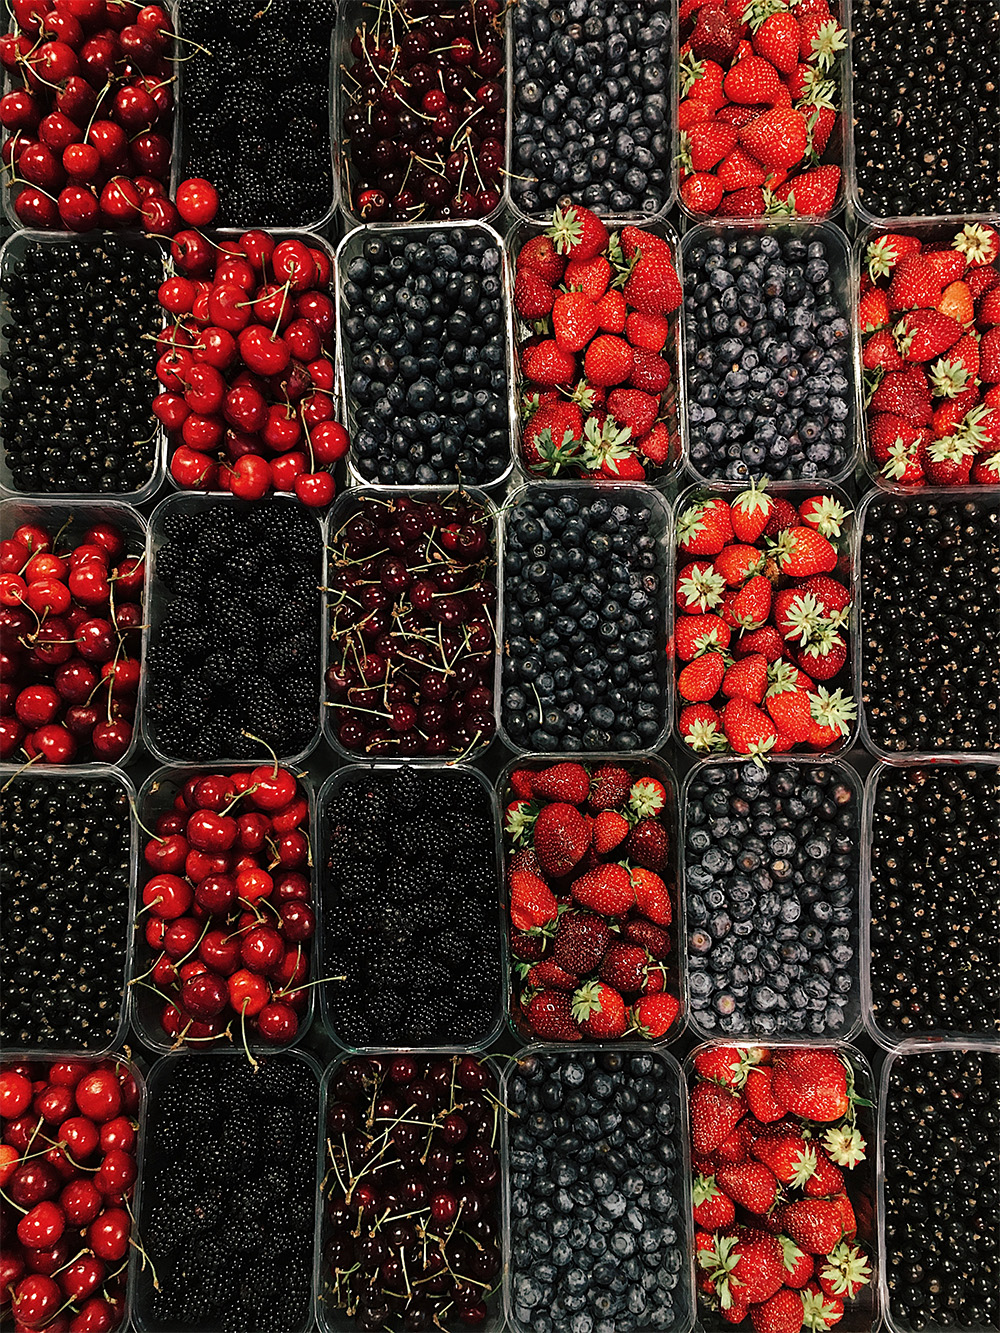 Staple superfoods that are worth your money - Berries